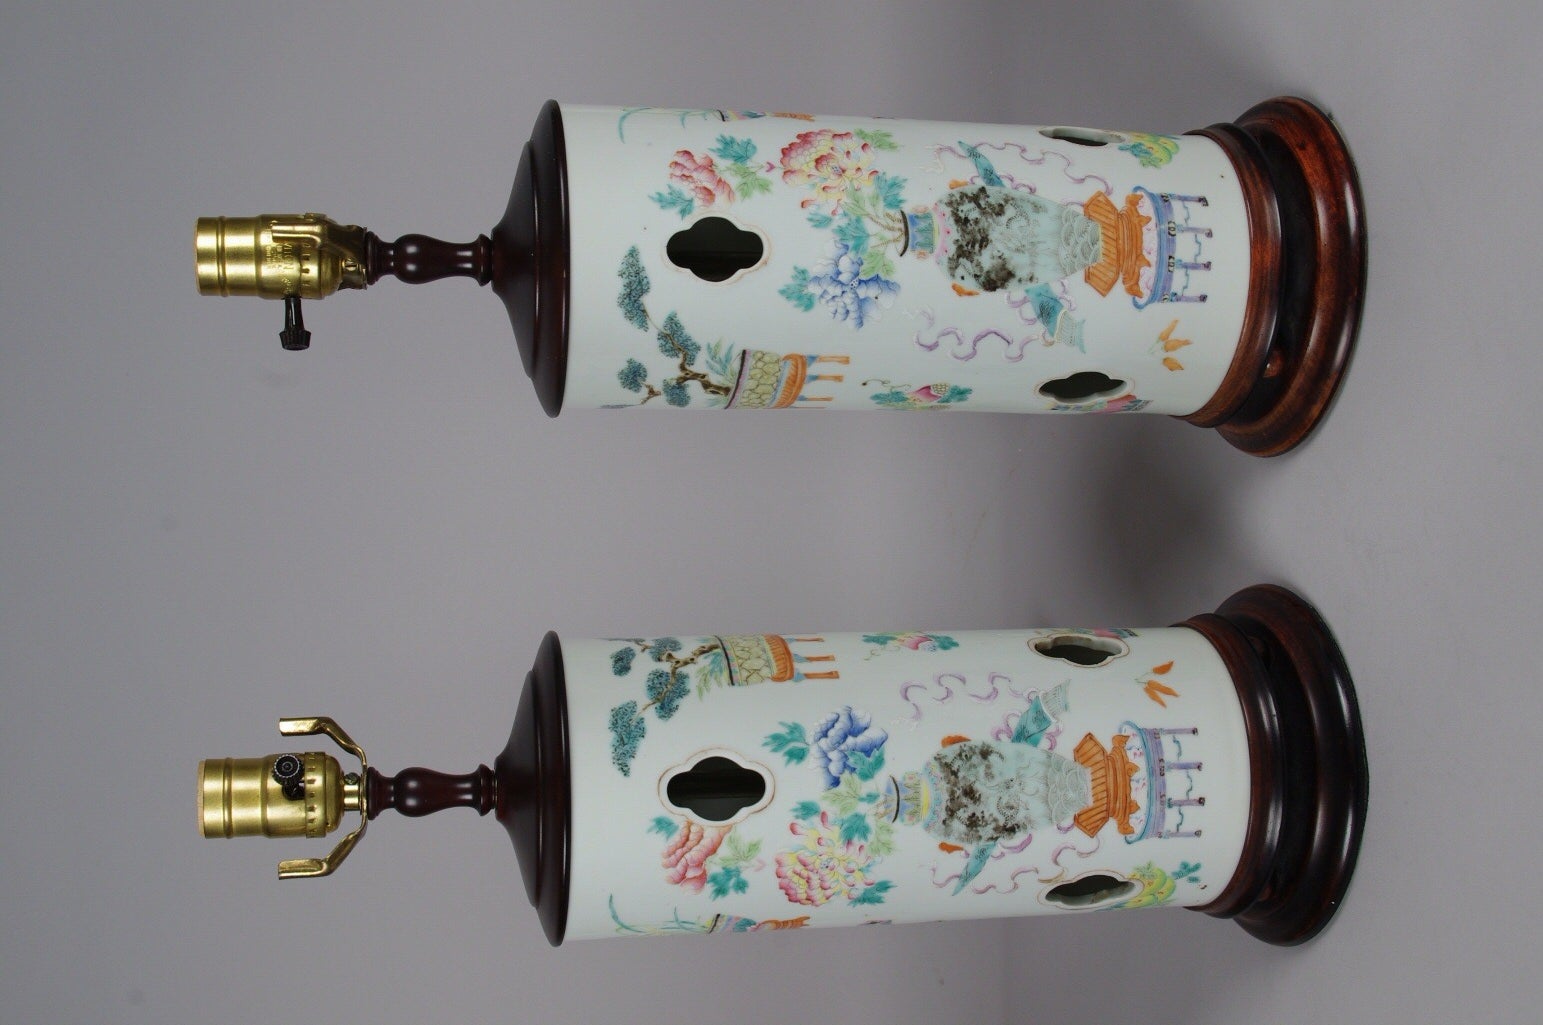 Pair of Chinese porcelain famille rose hat stands, each pierced with ventilation holes and well painted with a large vase of peonies and chrysanthemums on a stand; festooned with brightly painted symbols and motifs.

This is a true pair, as seen